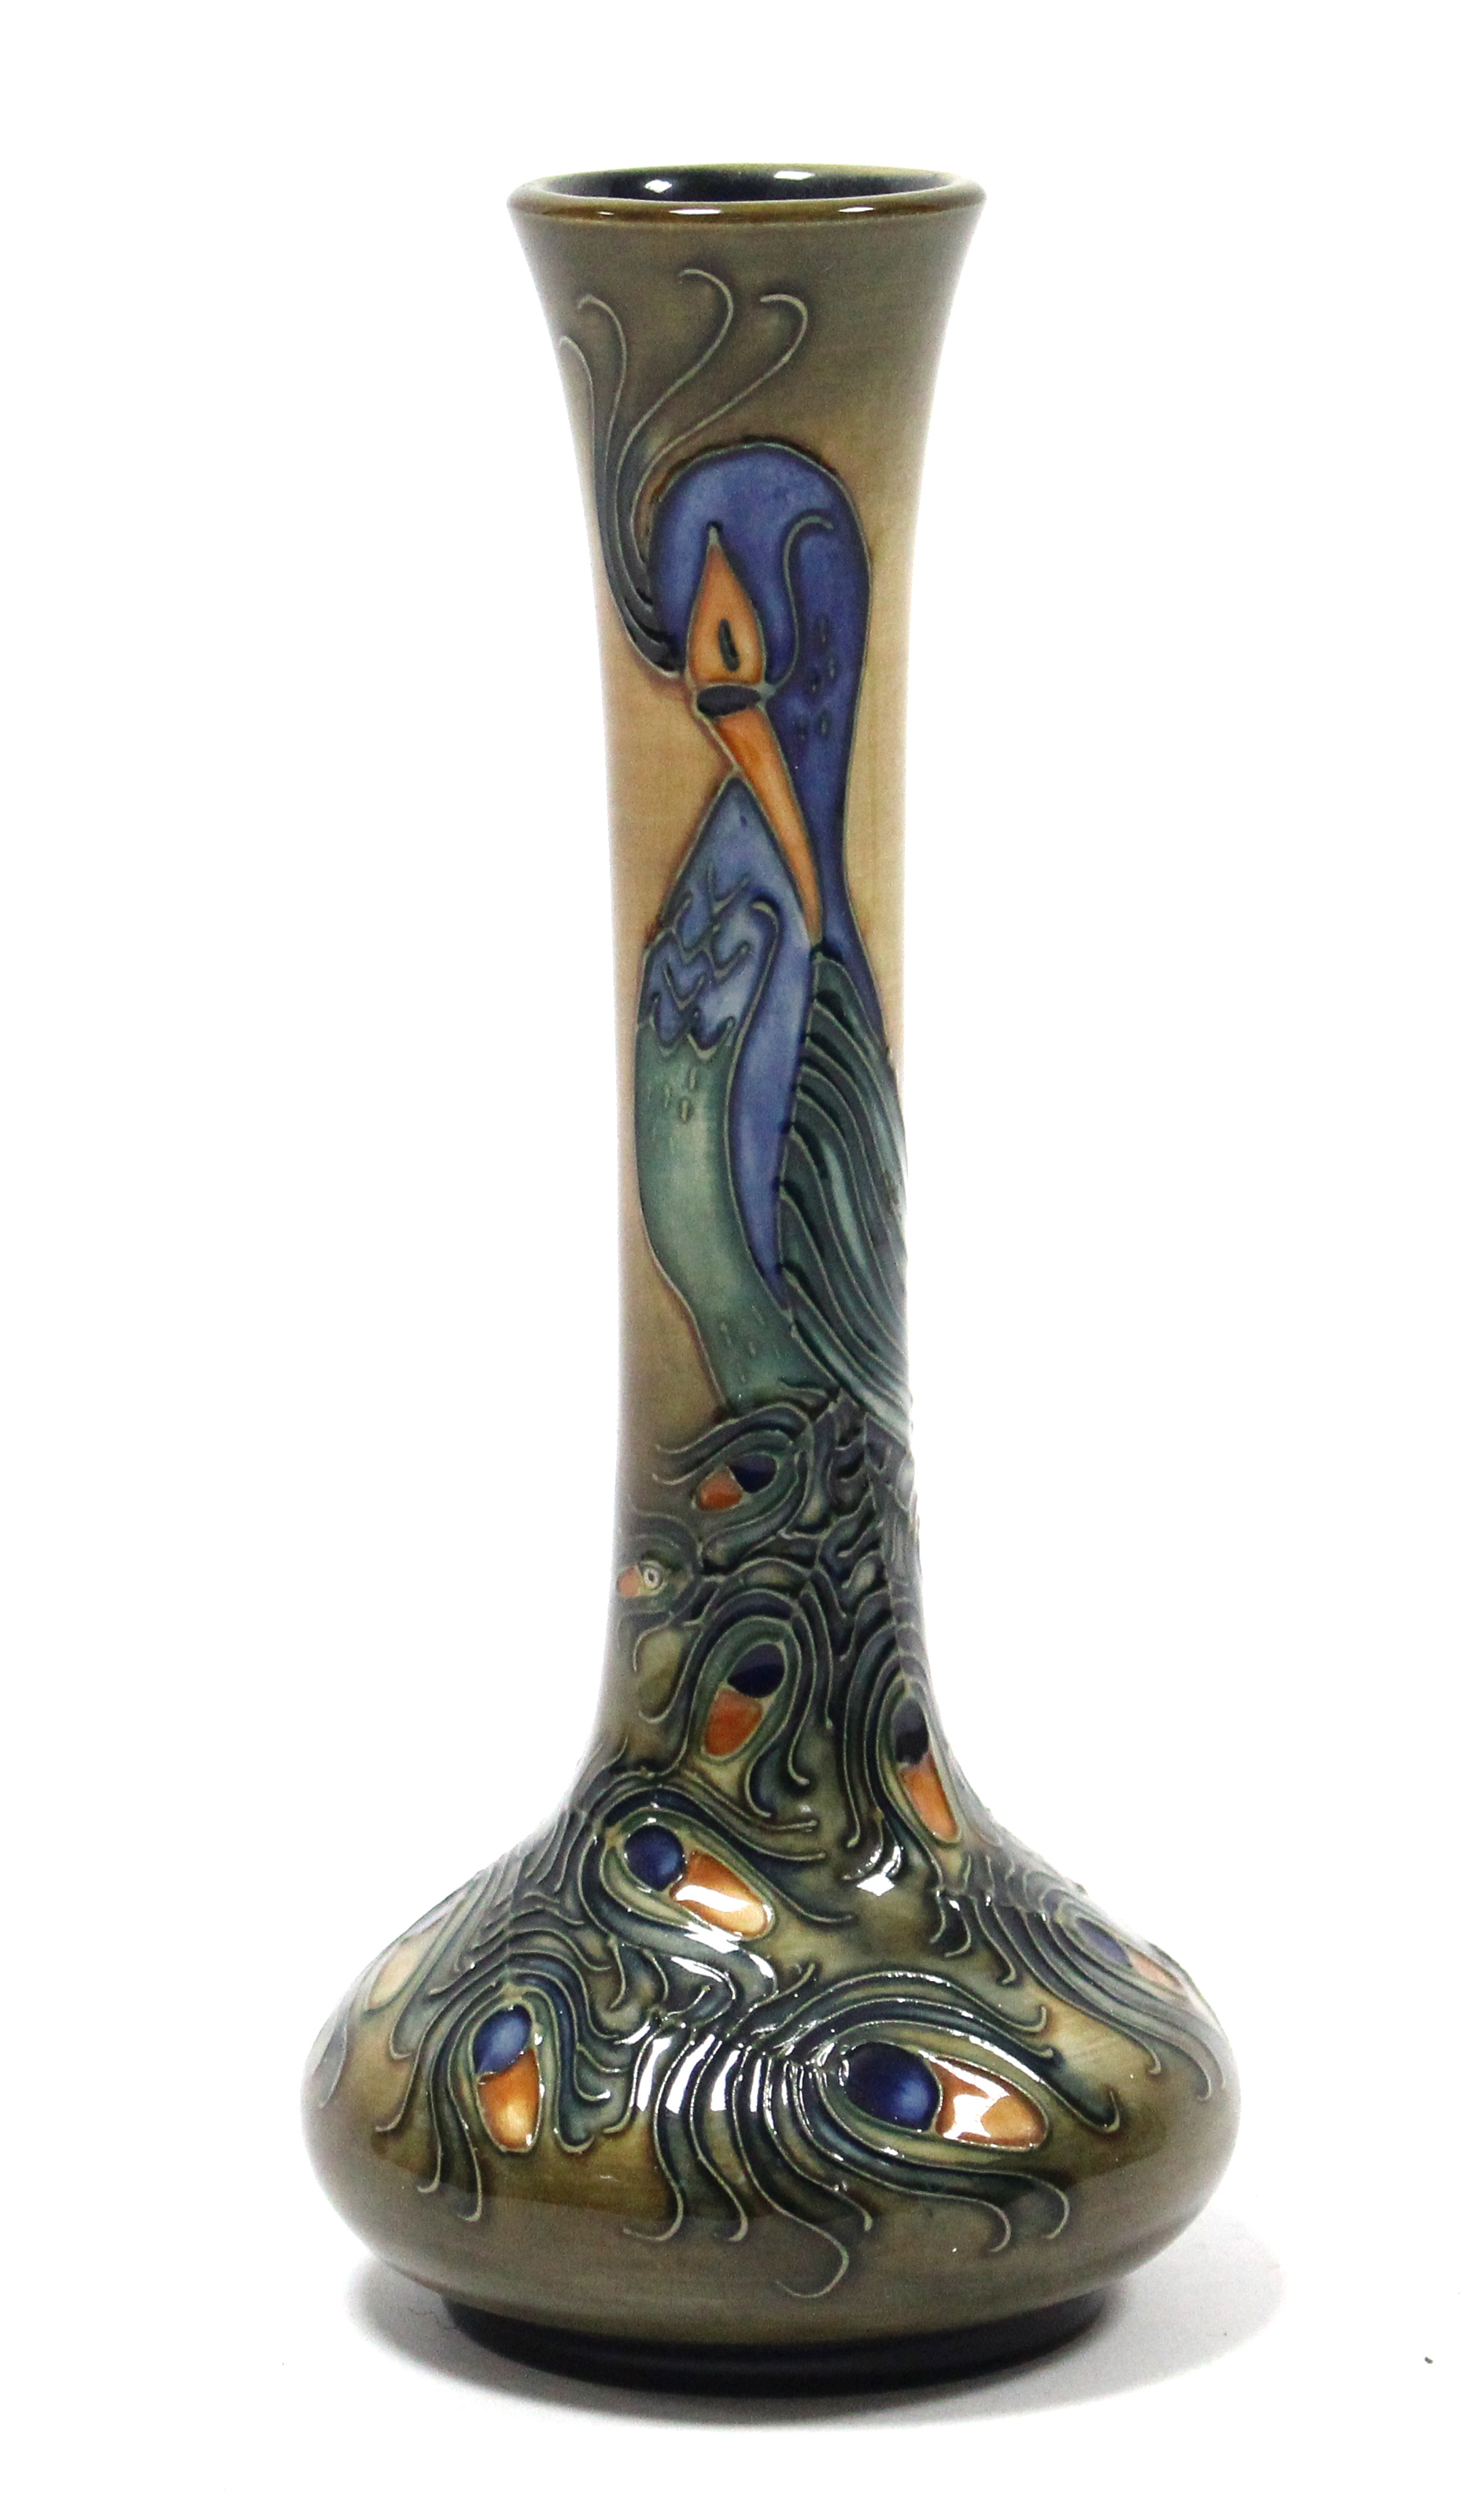 A Moorcroft pottery “Peacock” vase, designed by Rachel Bishop, with tall cylindrical neck on a squat